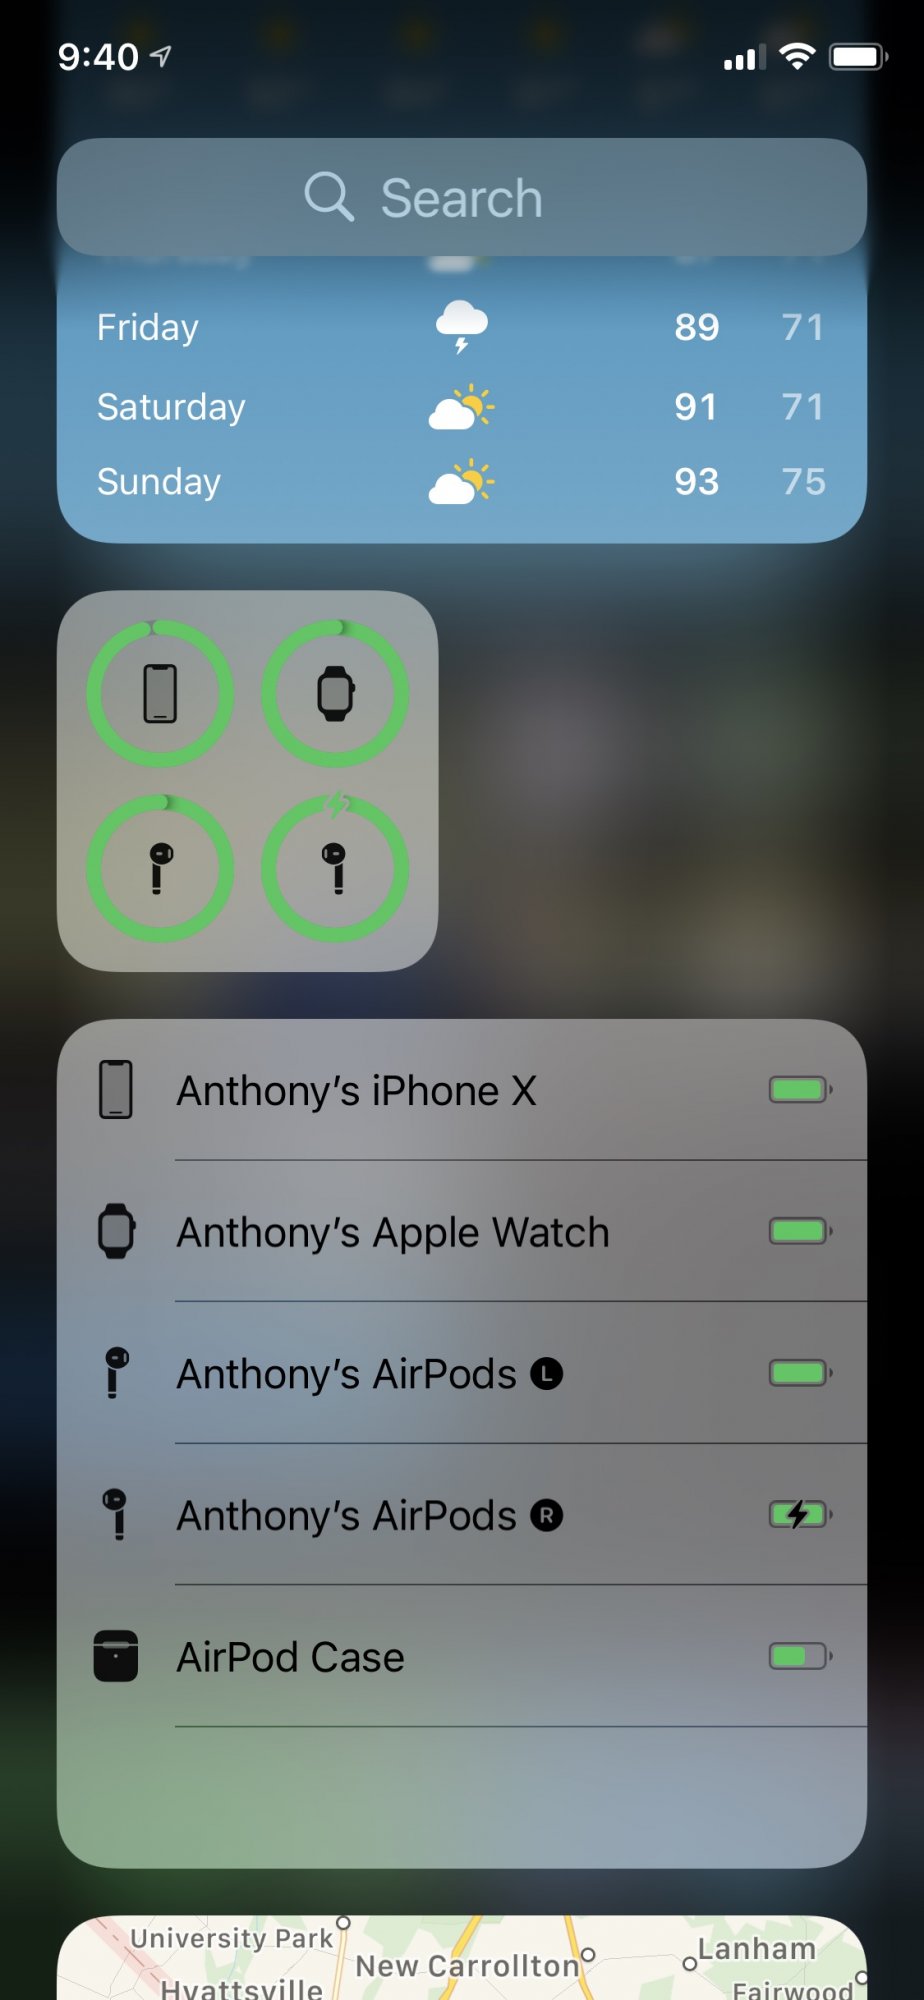 battery widget knobbled so useless for AirPod users | MacRumors Forums